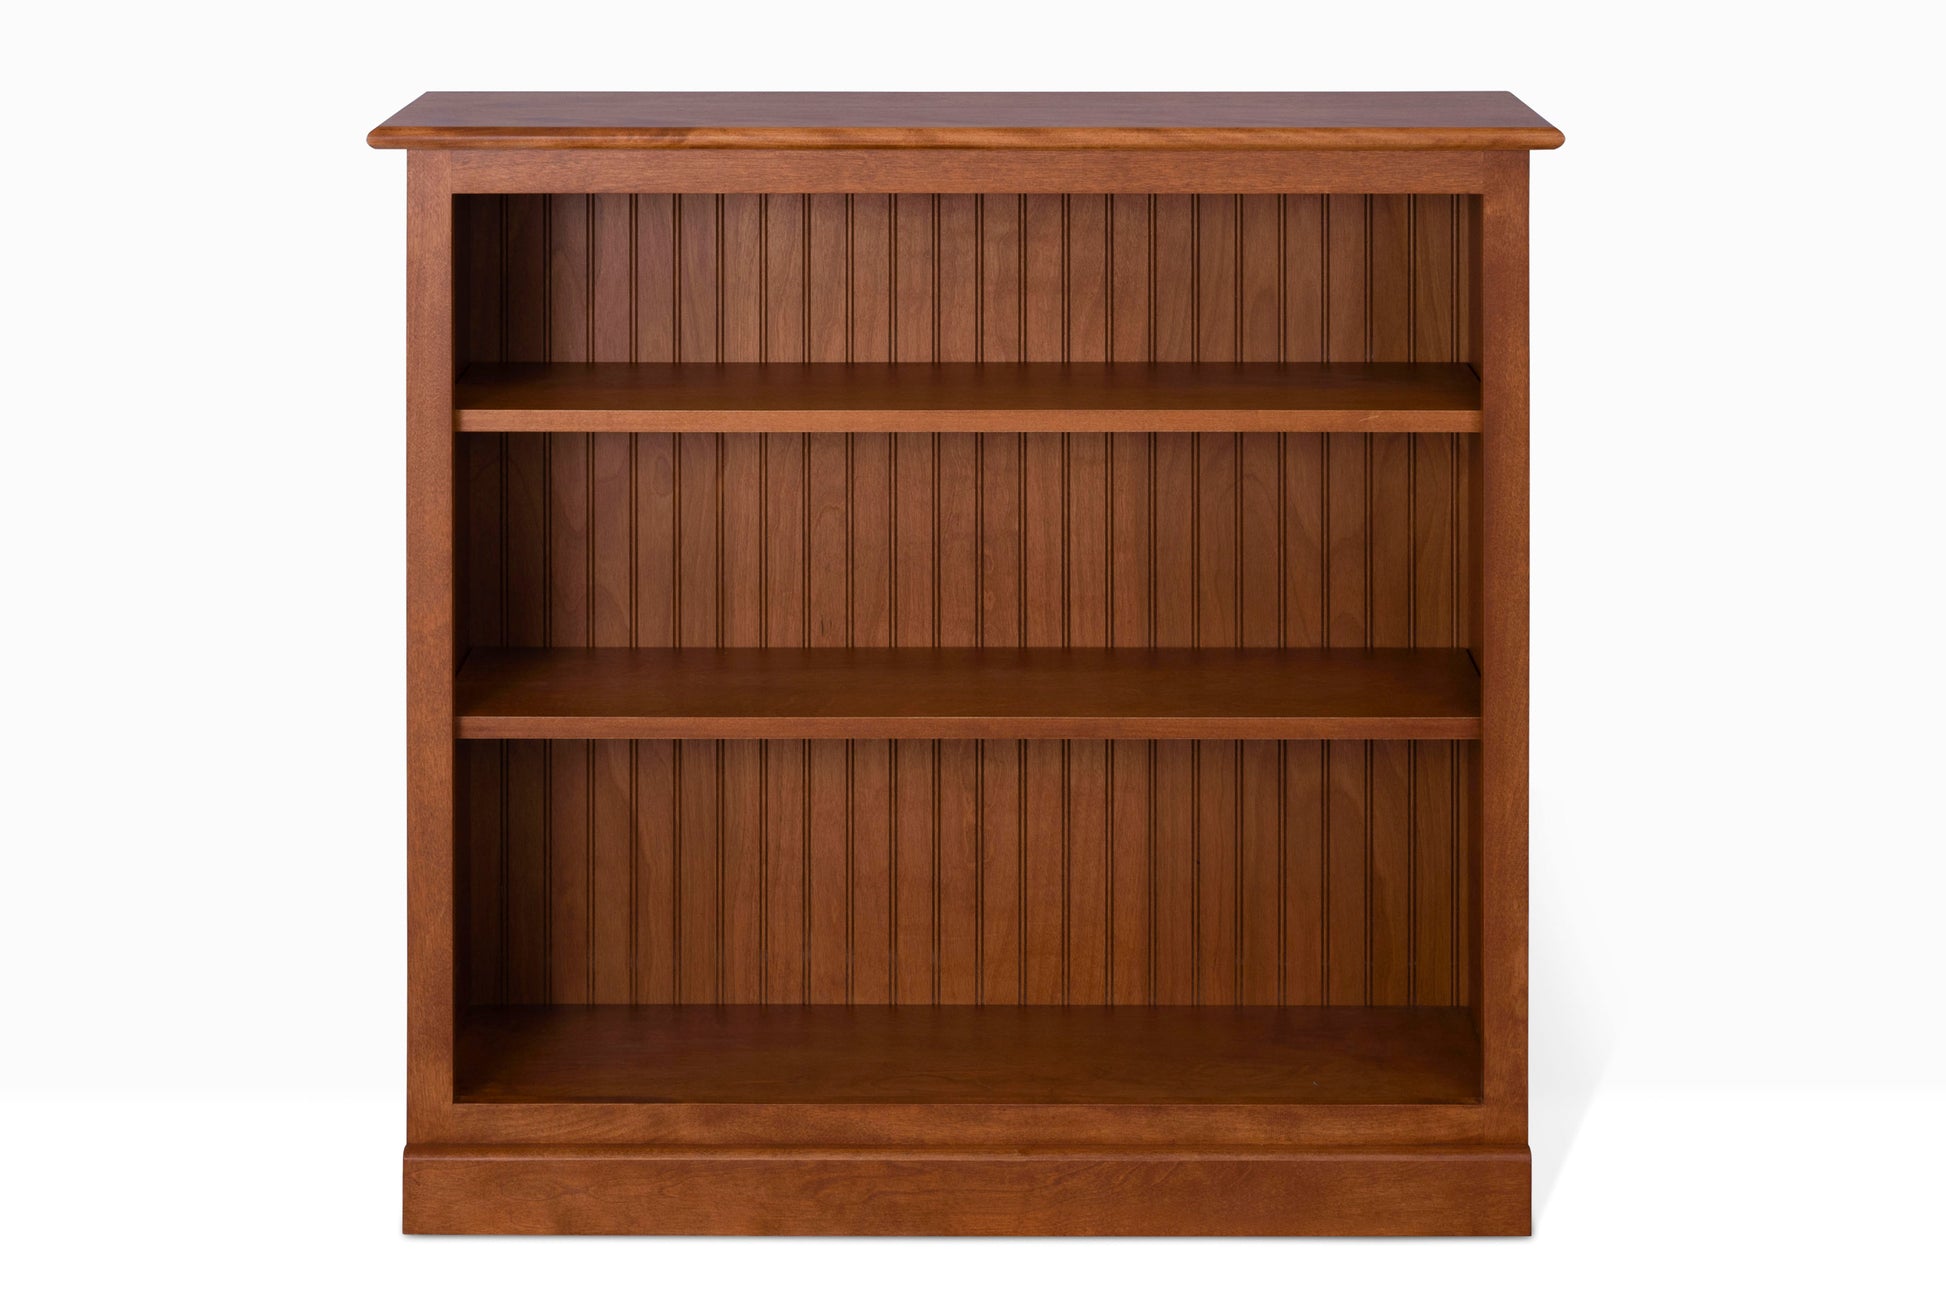 Acadia Cottage Bookcases: Compact and charming with a nutmeg finish and rustic design, ideal for small spaces at 12" depth. Shelving is adjustable.